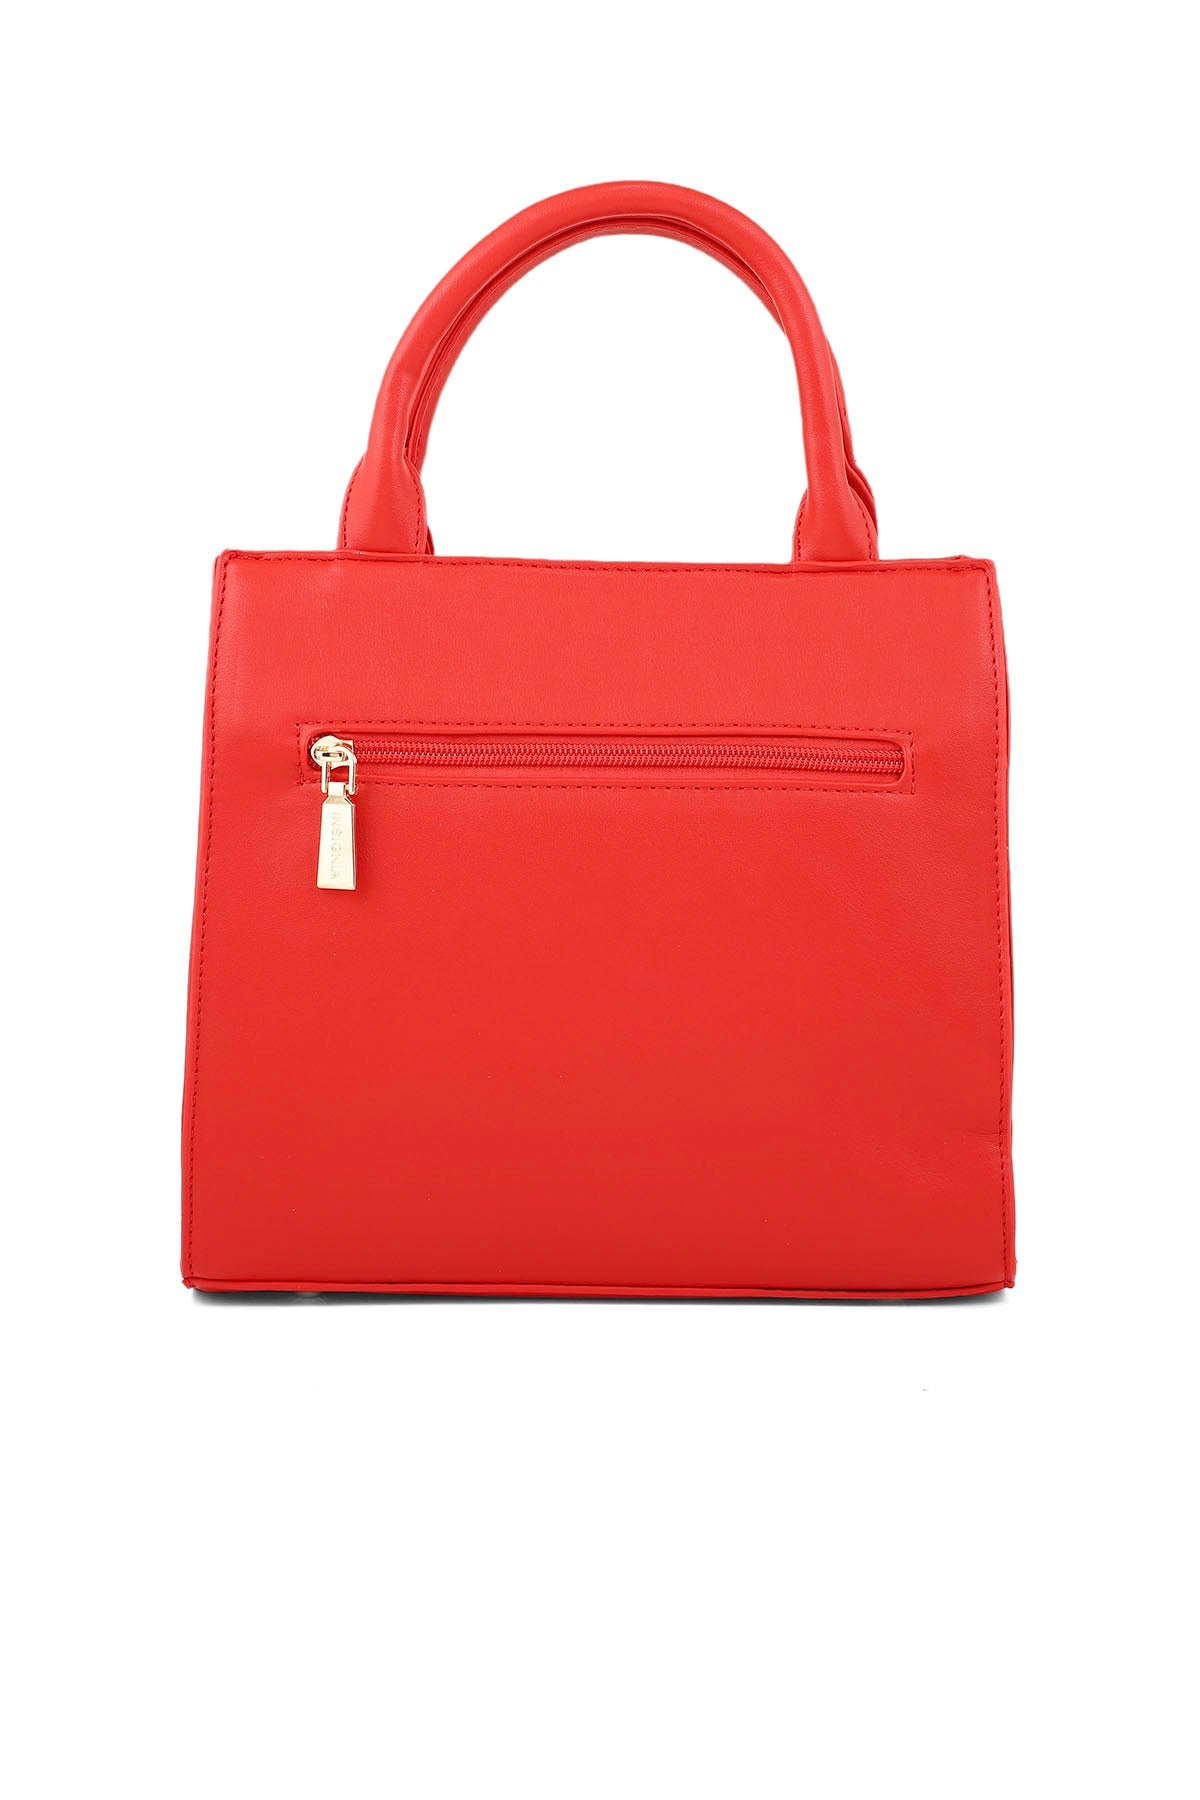 Formal Tote Hand Bags B15066-Red